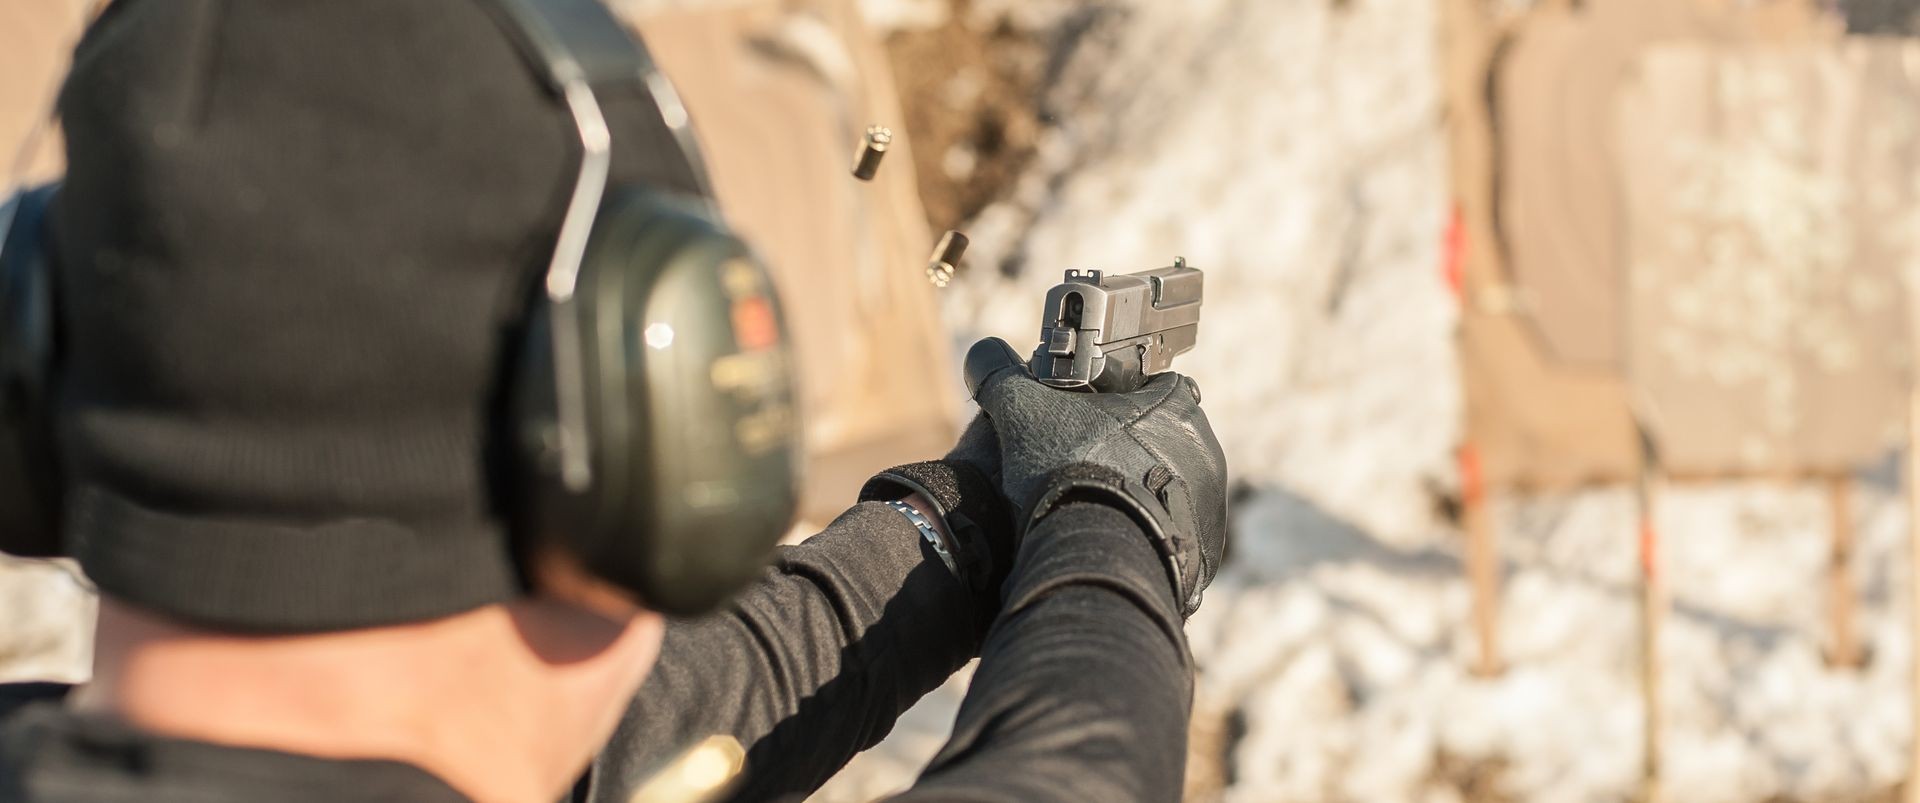 Detail view of shooter holding gun in hand and shooting, close up. Shooting range